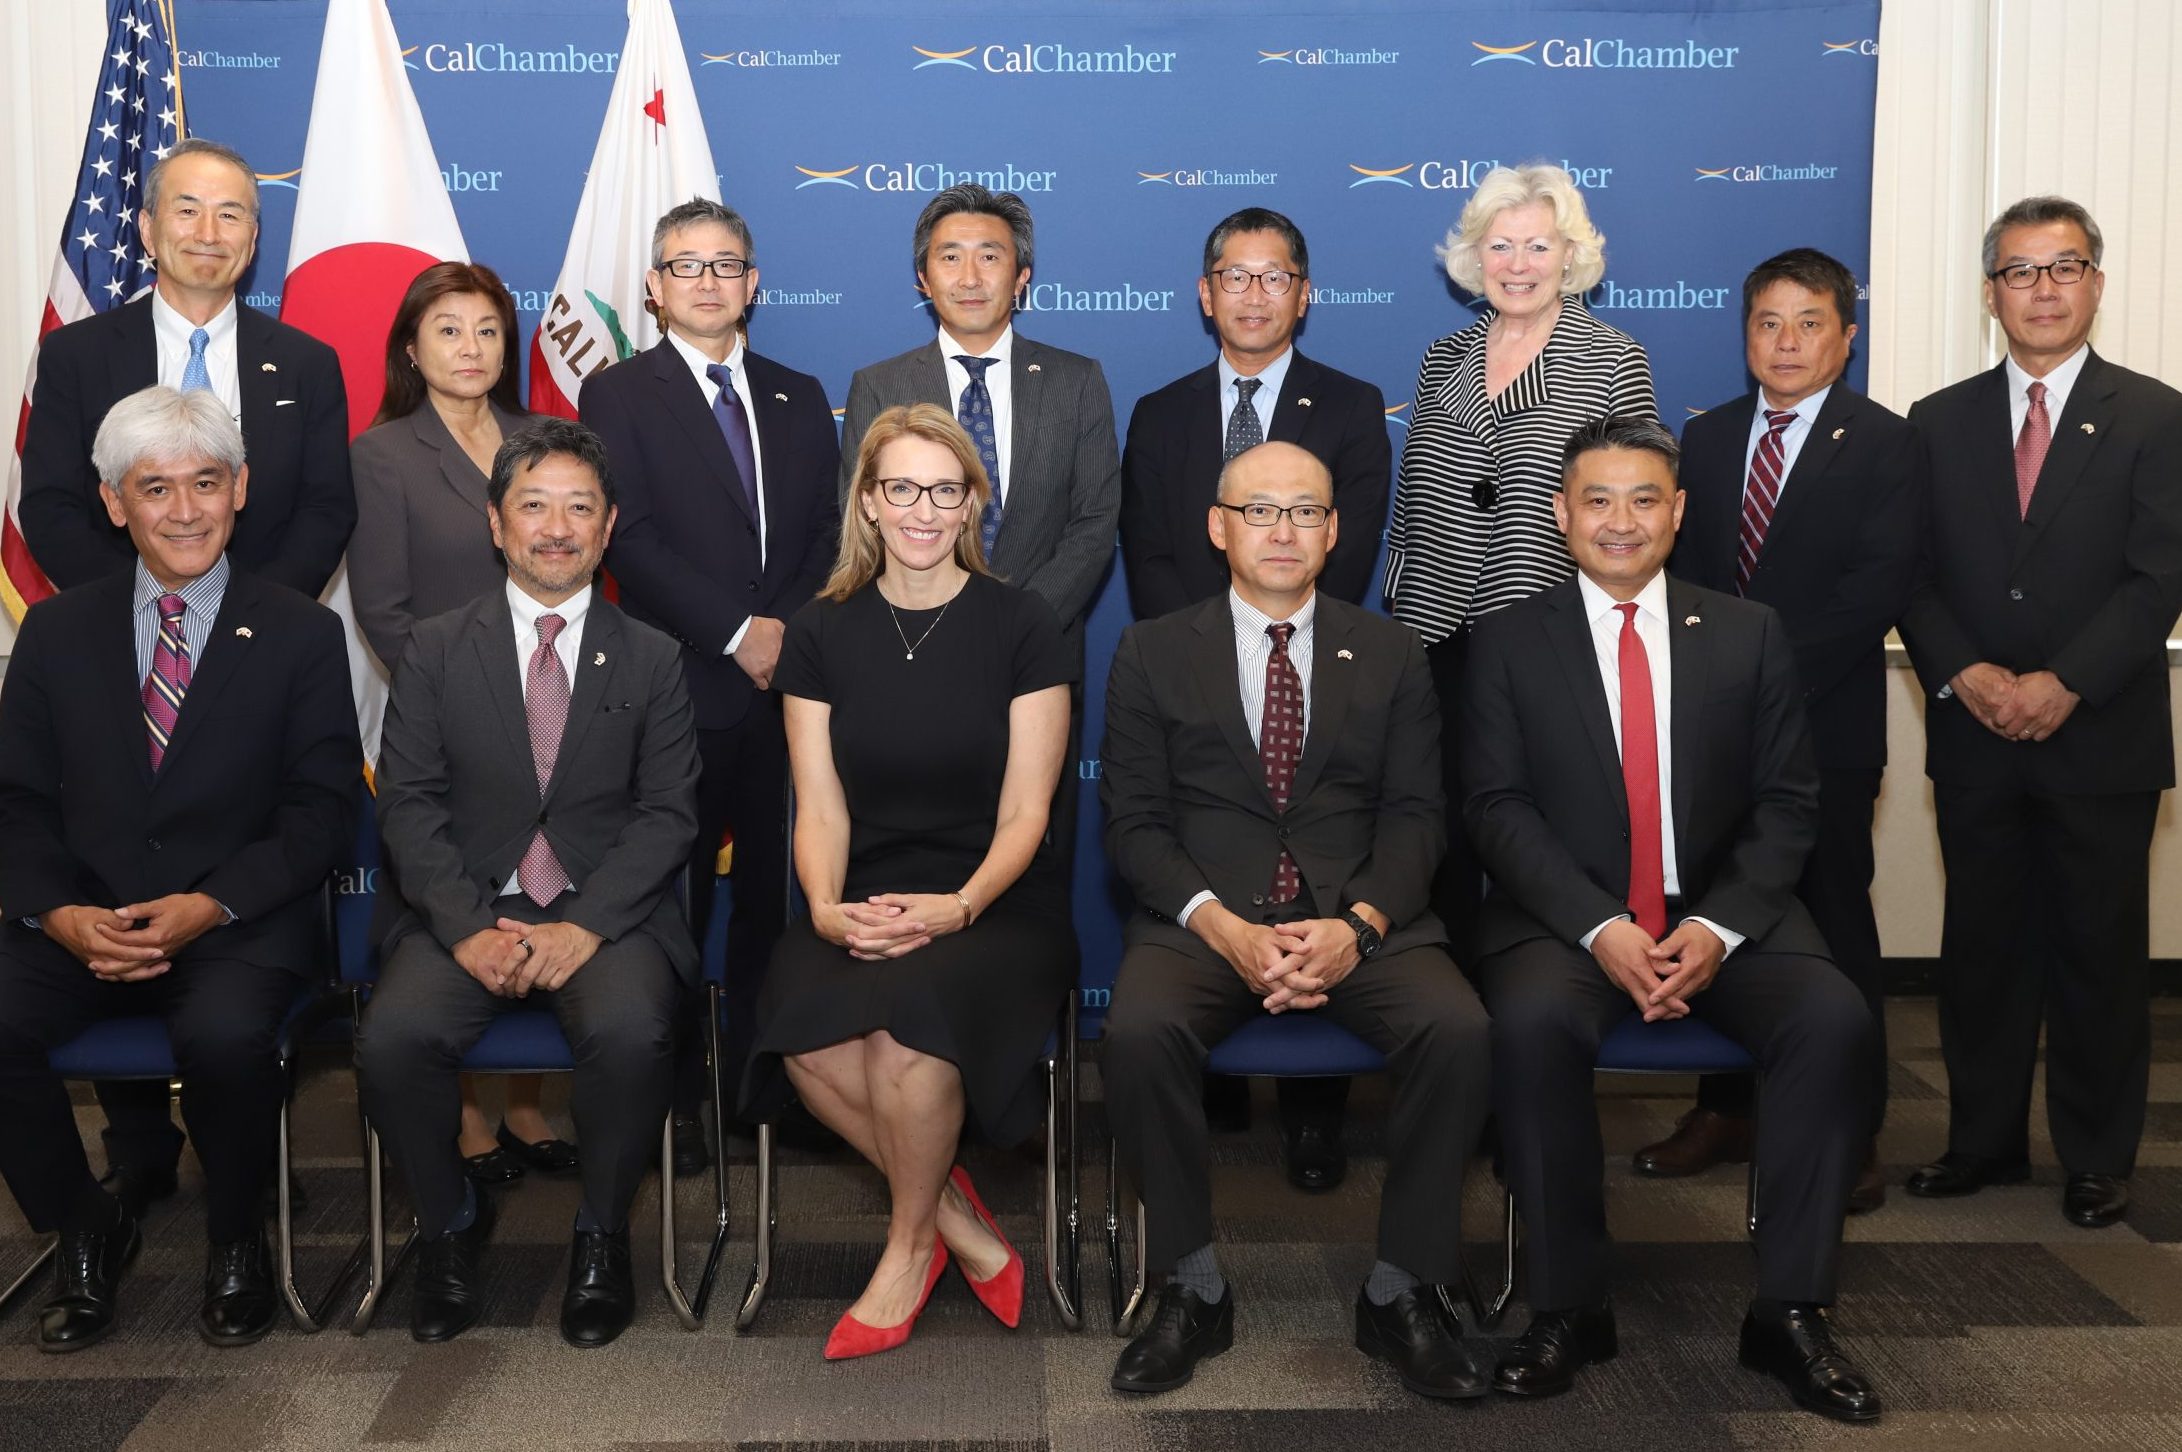 2nd annual meeting between the California Chamber of Commerce and Japan business leaders